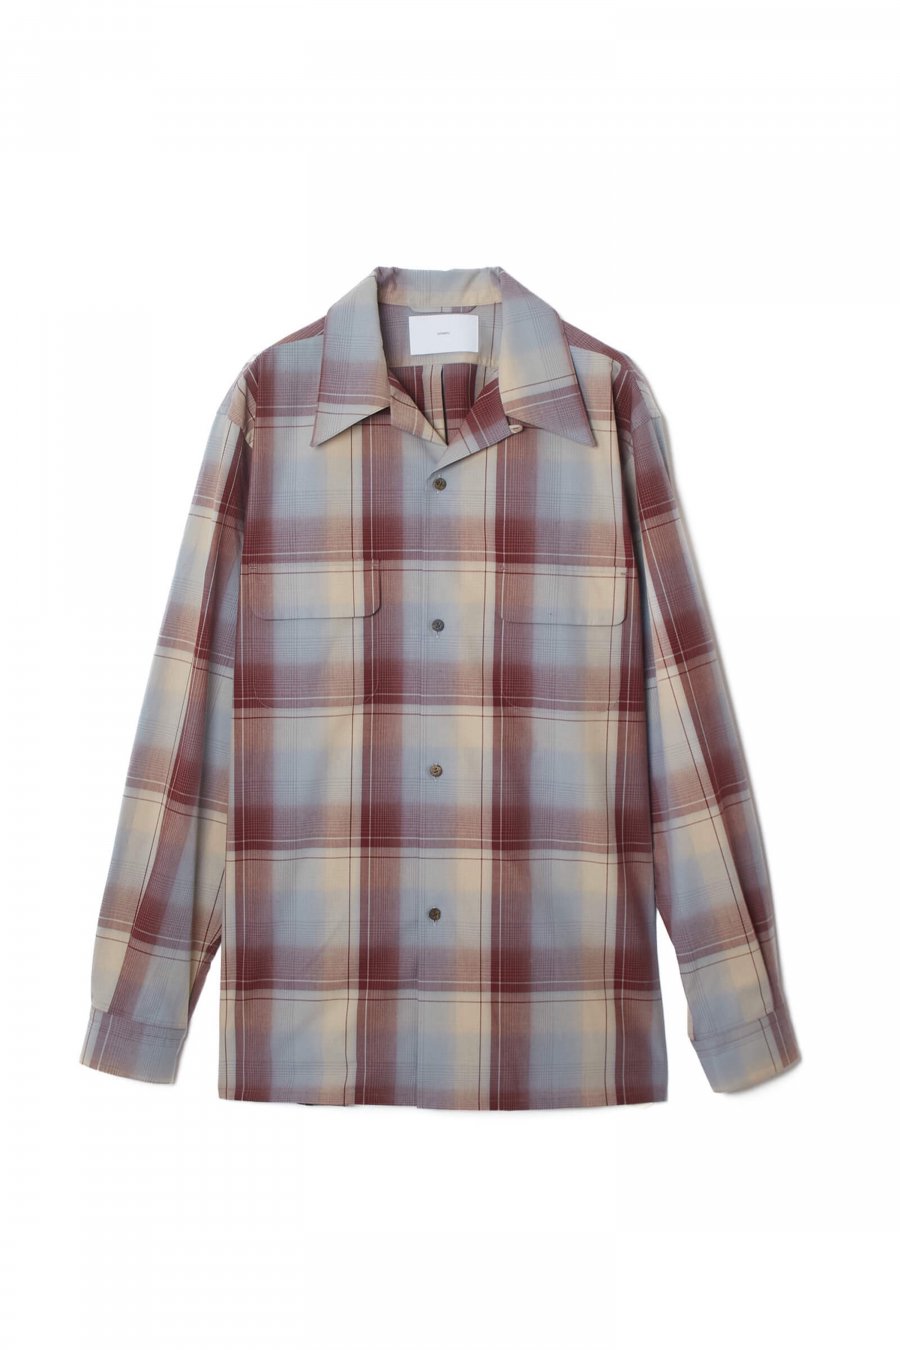 SUGARHILL  OMBRE PLAID OPEN COLLAR BLOUSE(WINE ICE BLUE)<img class='new_mark_img2' src='https://img.shop-pro.jp/img/new/icons15.gif' style='border:none;display:inline;margin:0px;padding:0px;width:auto;' />